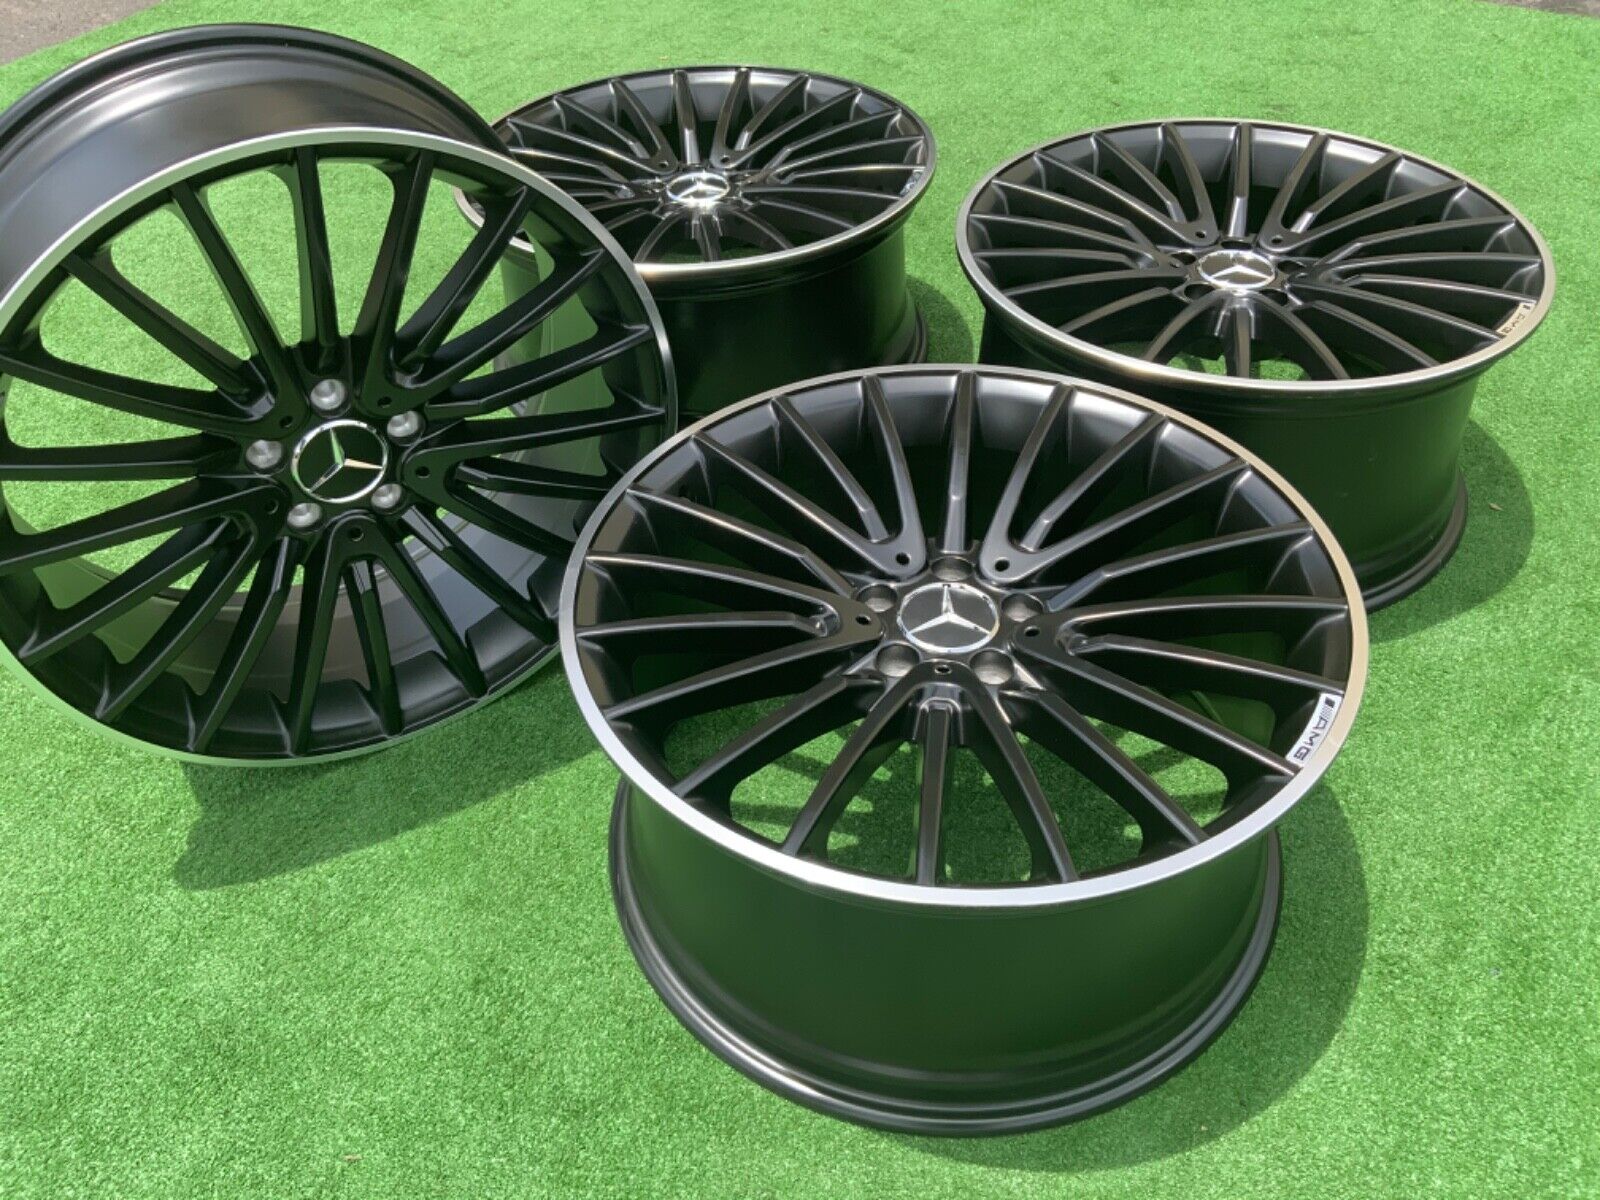 Mercedes S560 S580 S55 S600 S550 S65 CL500 CL550 20 Inch Set Wheels Brand New